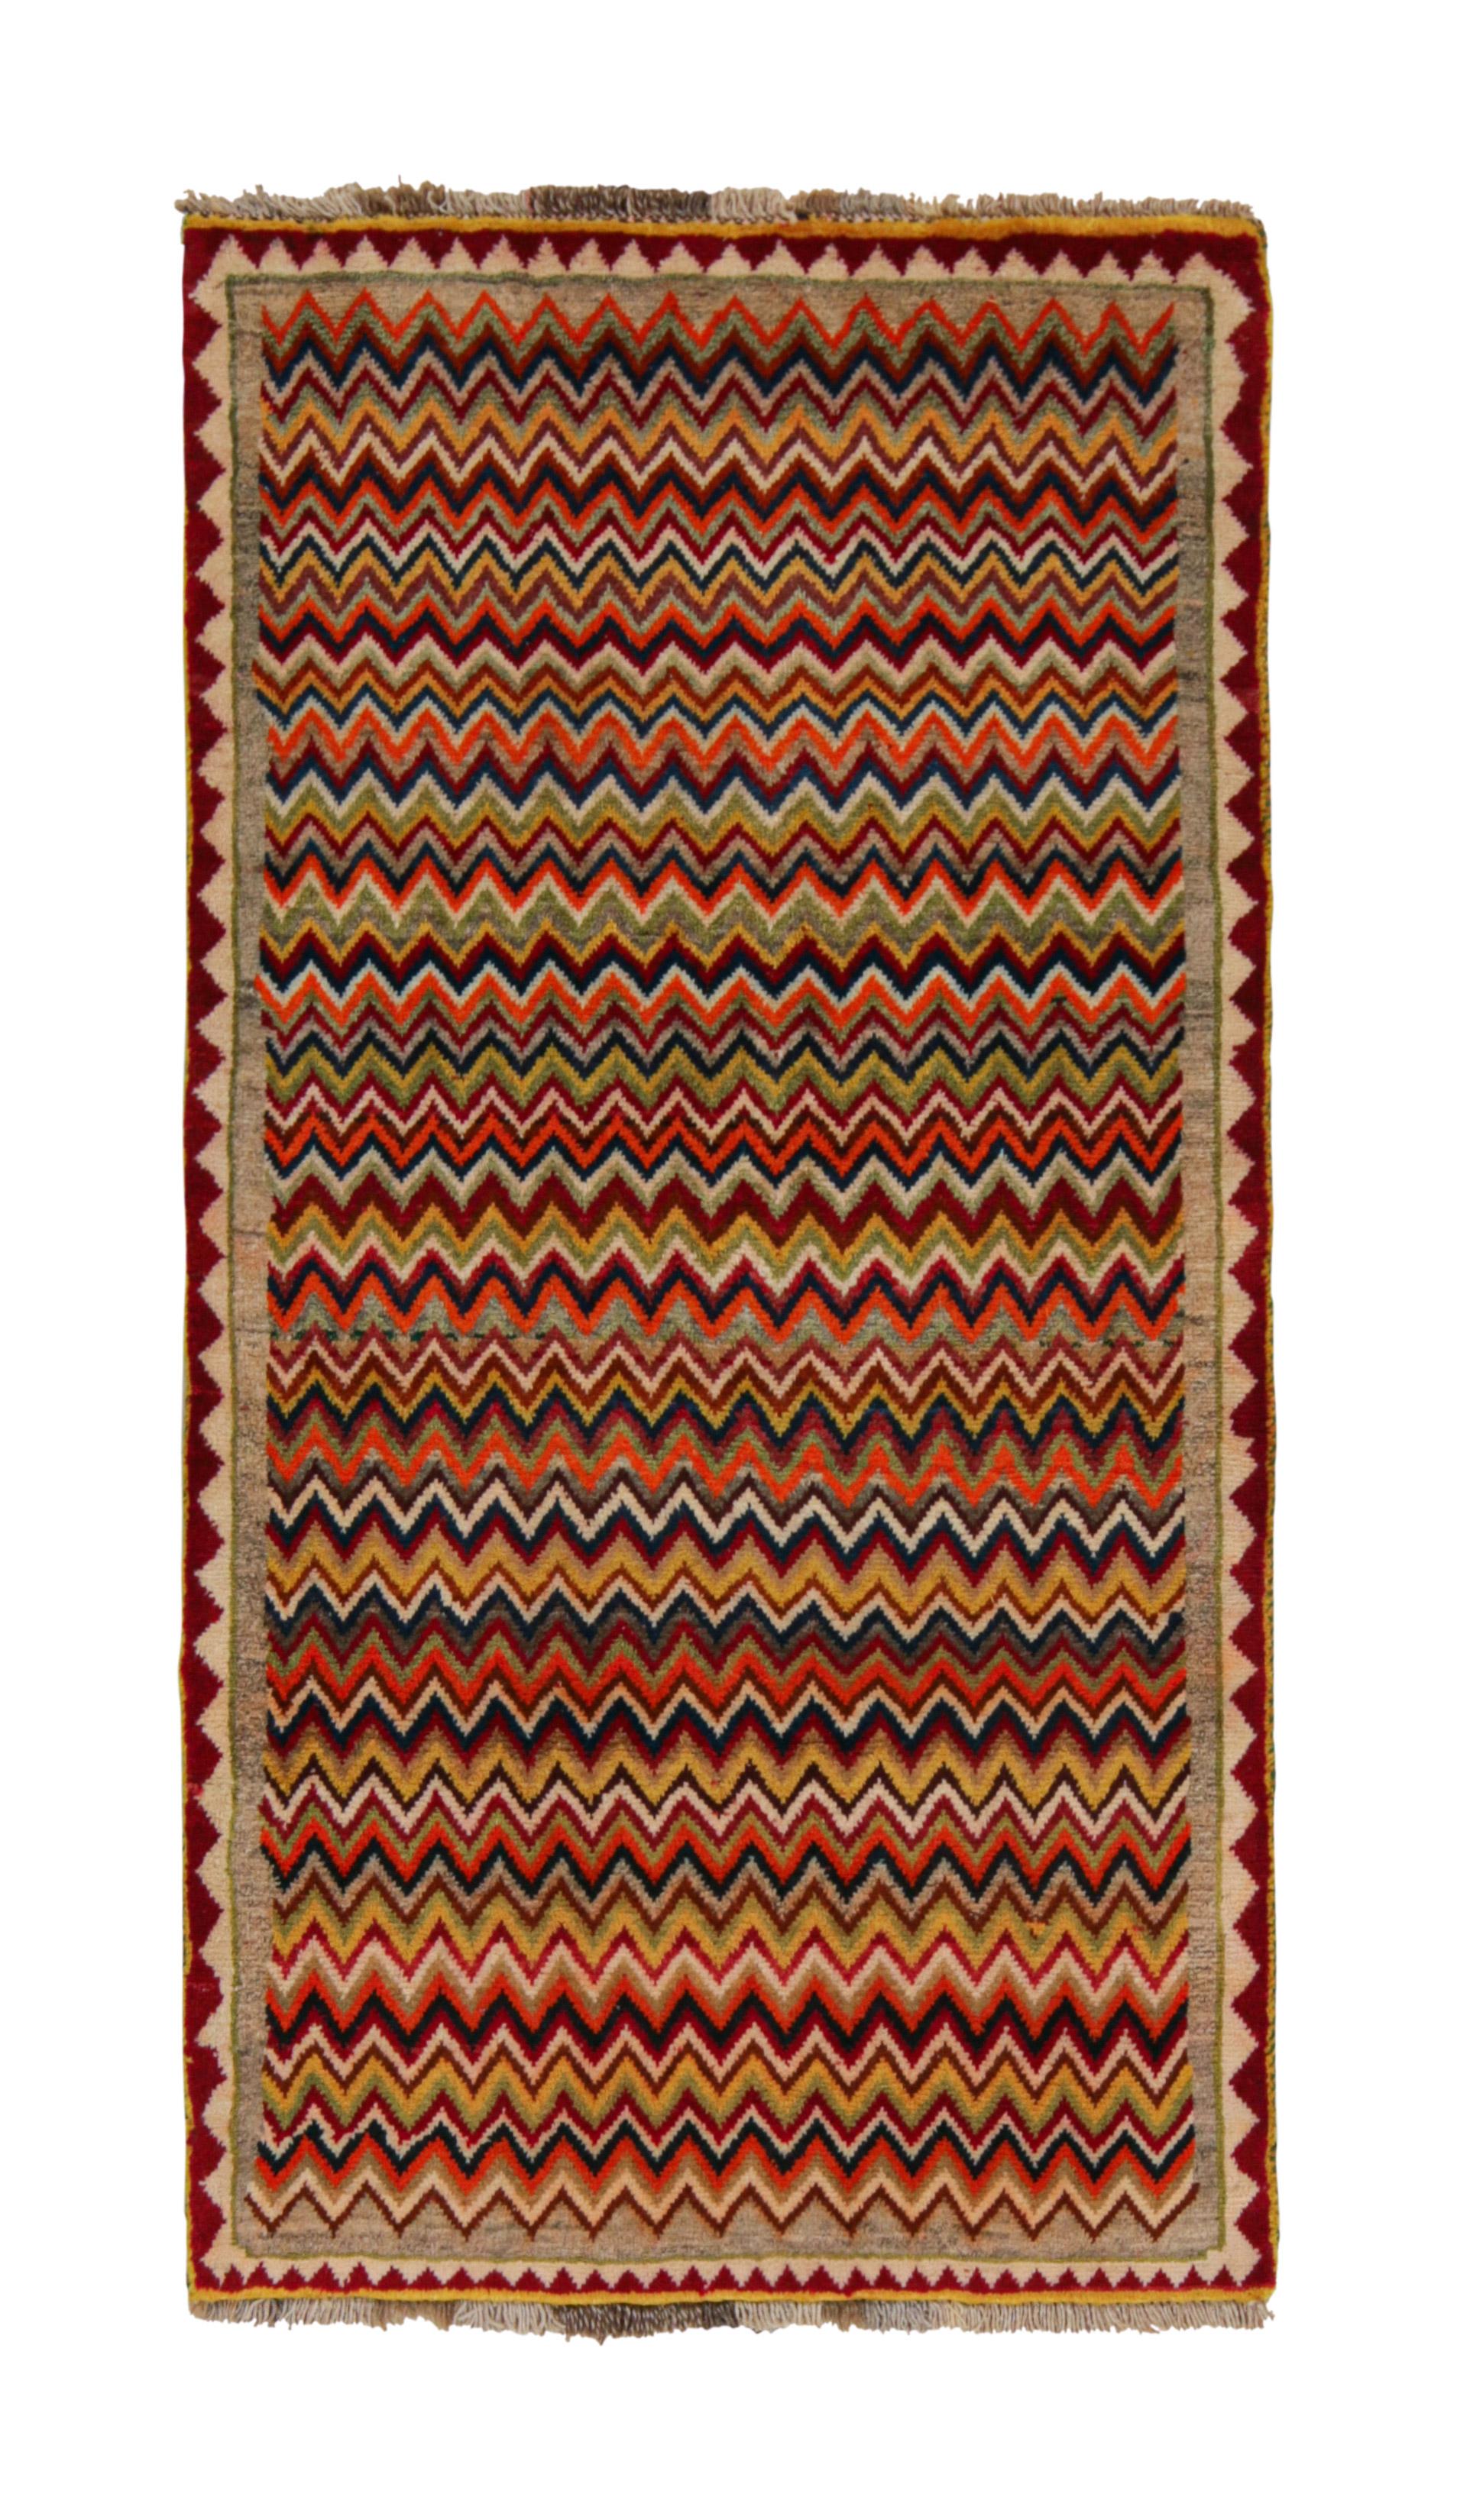 This vintage 4x7 Gabbeh Persian rug is from the latest entries in Rug & Kilim’s rare tribal curations. Hand-knotted in wool circa 1950-1960.

On the Design:

This tribal provenance is one of the most primitive, and collectible shabby-chic styles